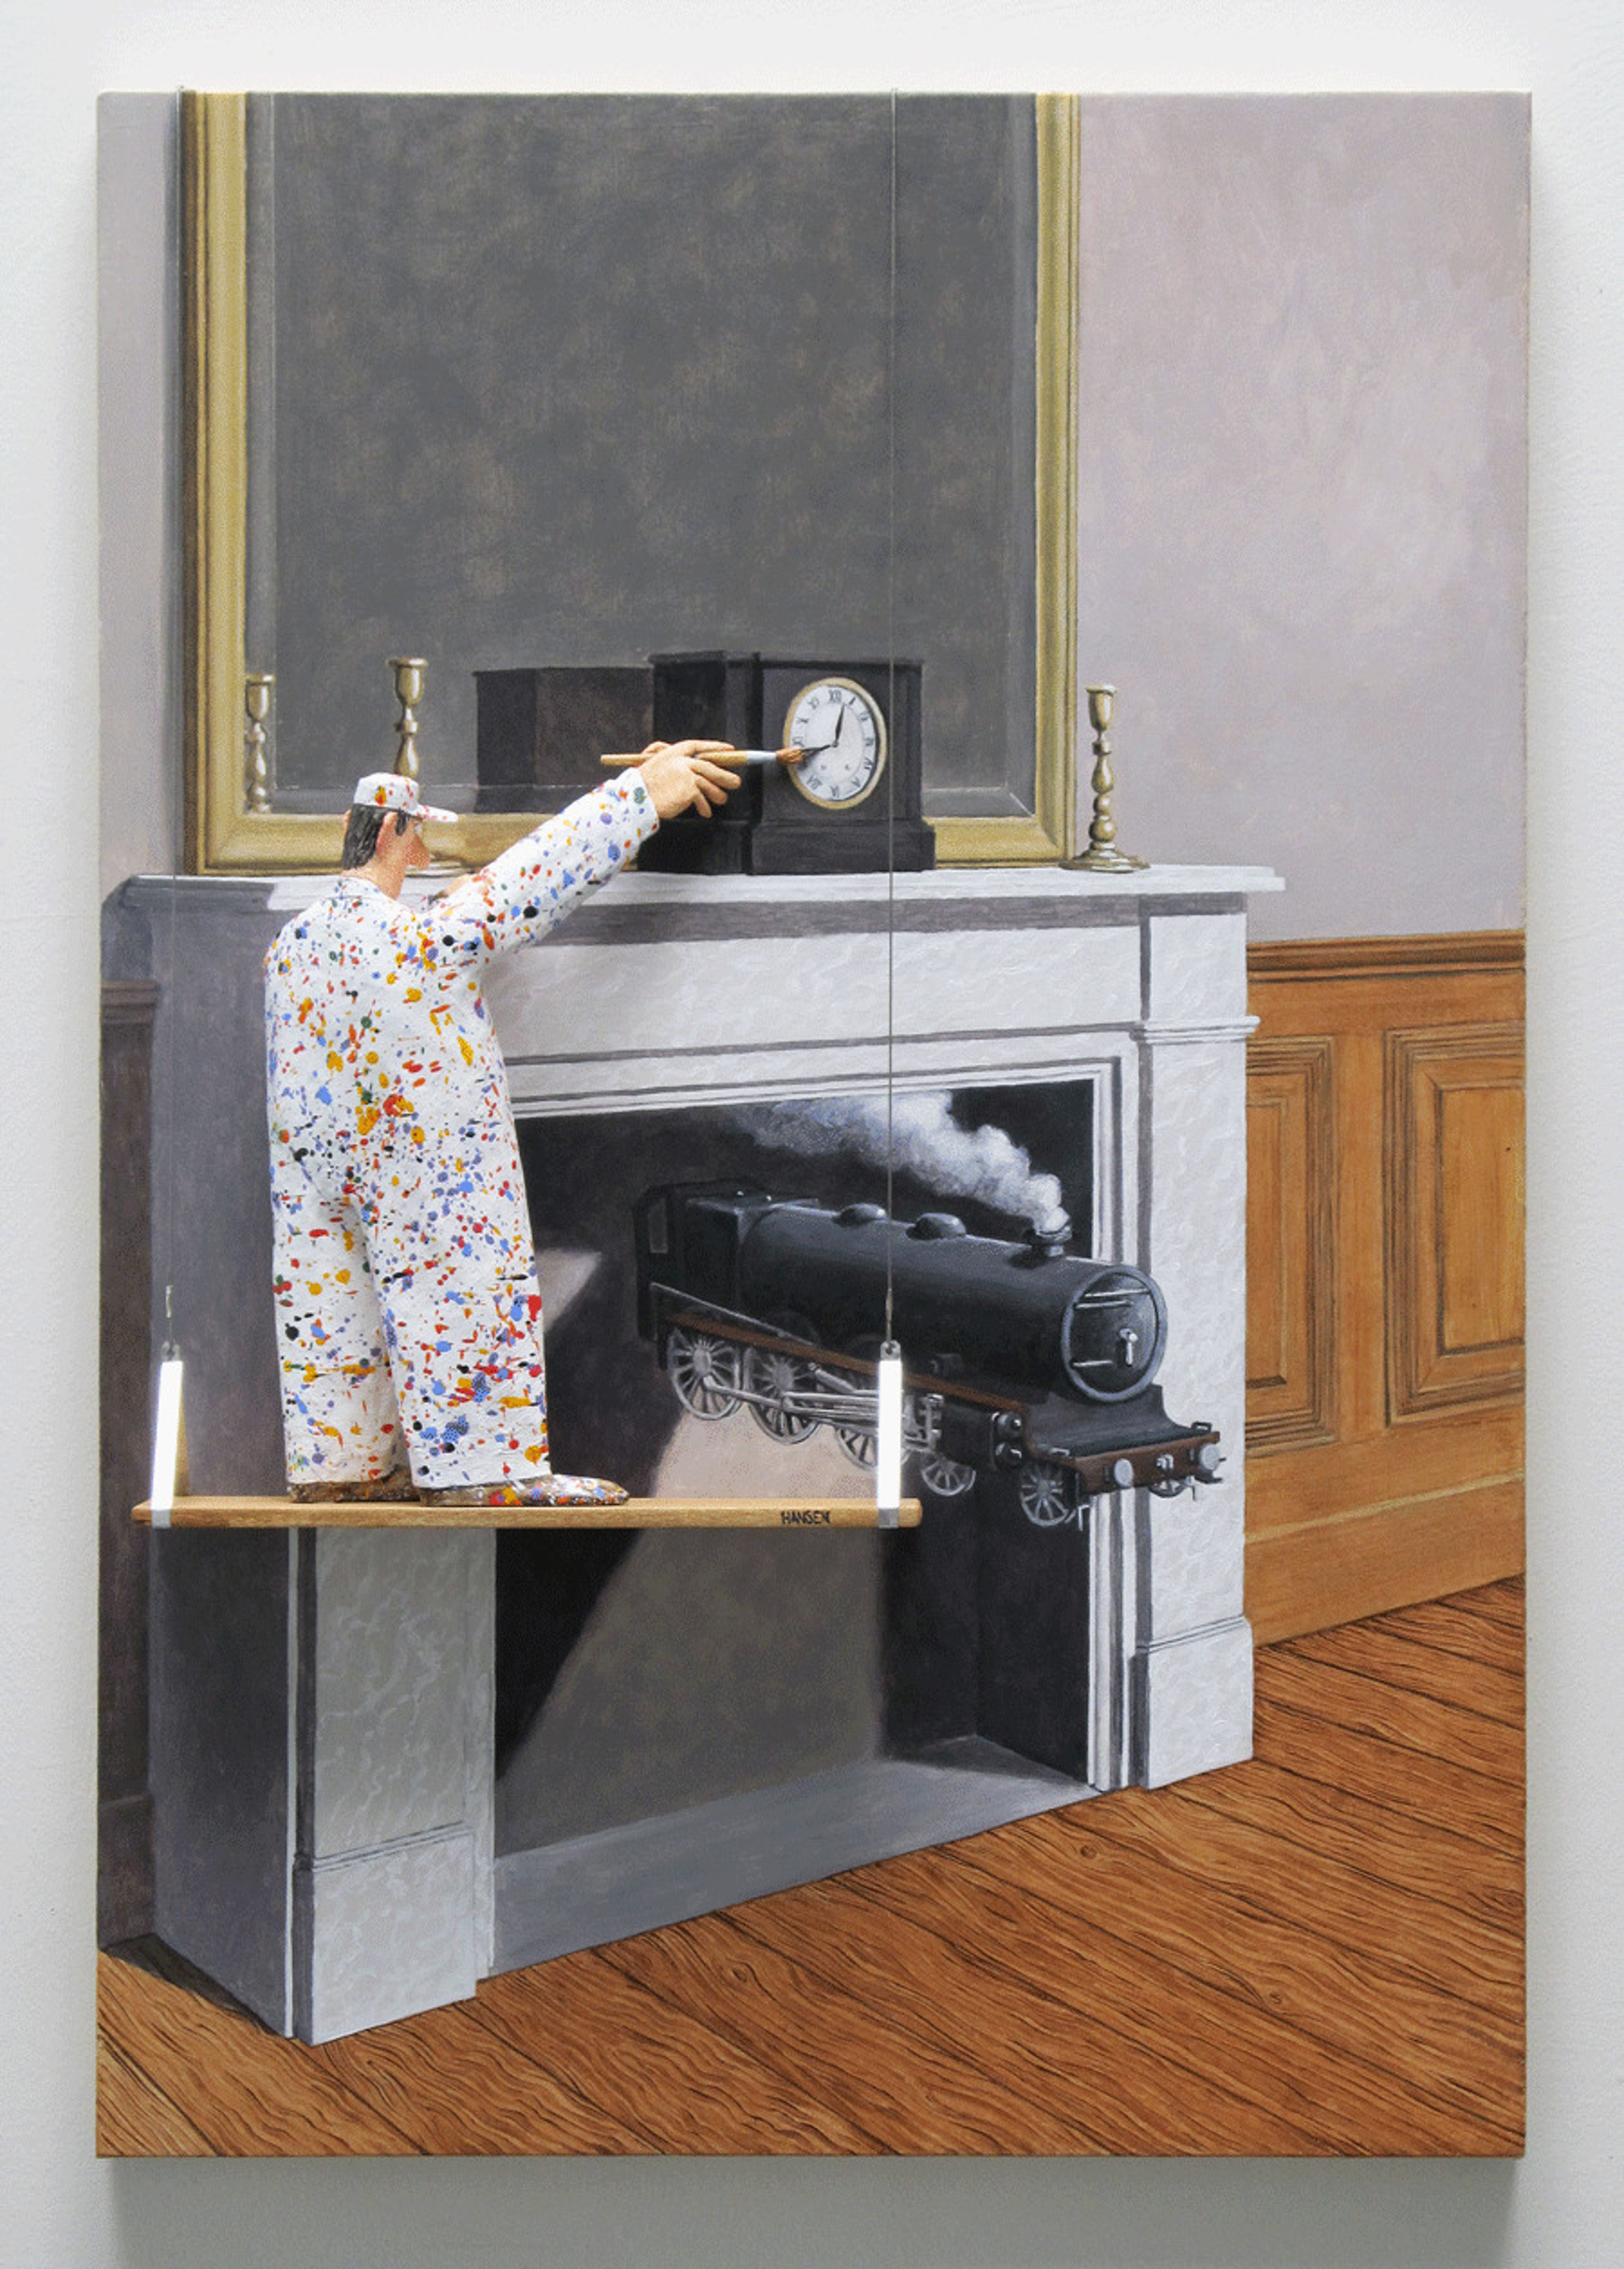 Time Transfixed (Magritte) by Stephen Hansen